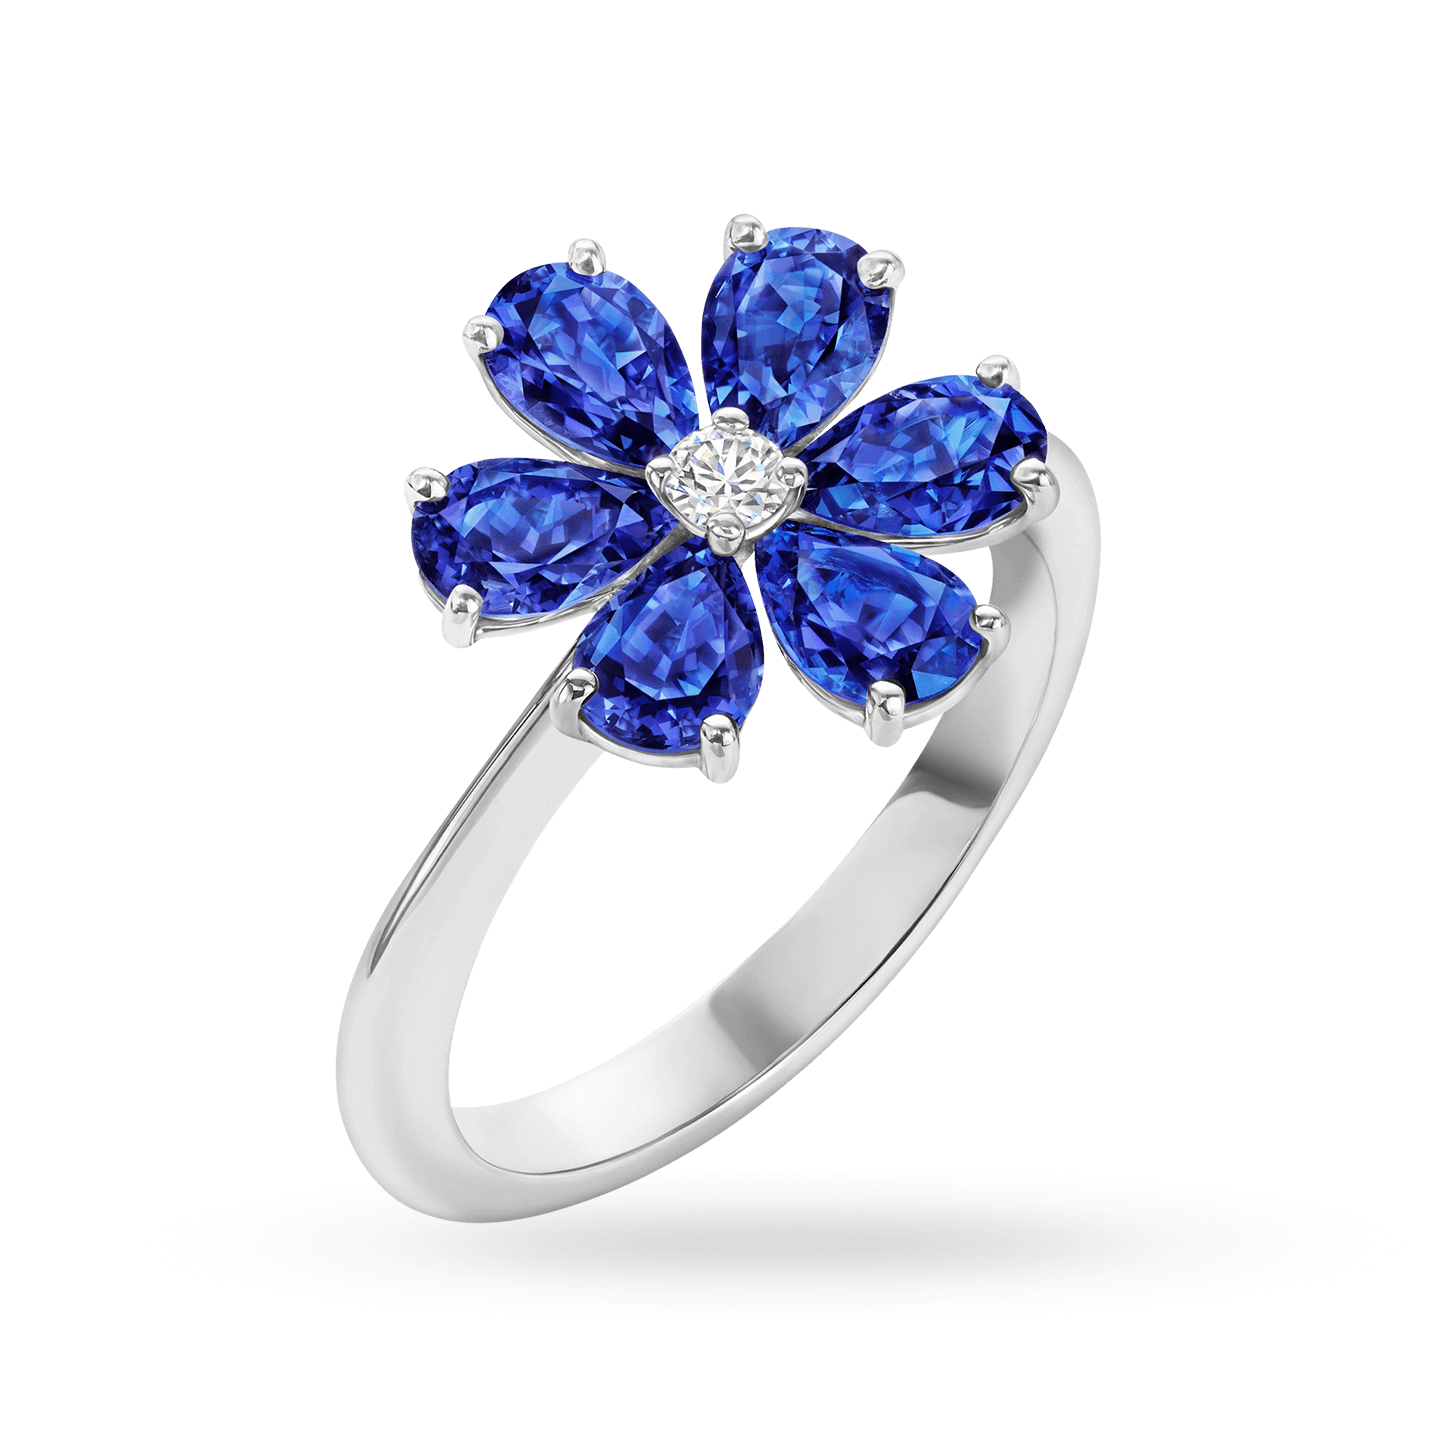 Forget-Me-Not Sapphire and Diamond Ring, Product Image 2